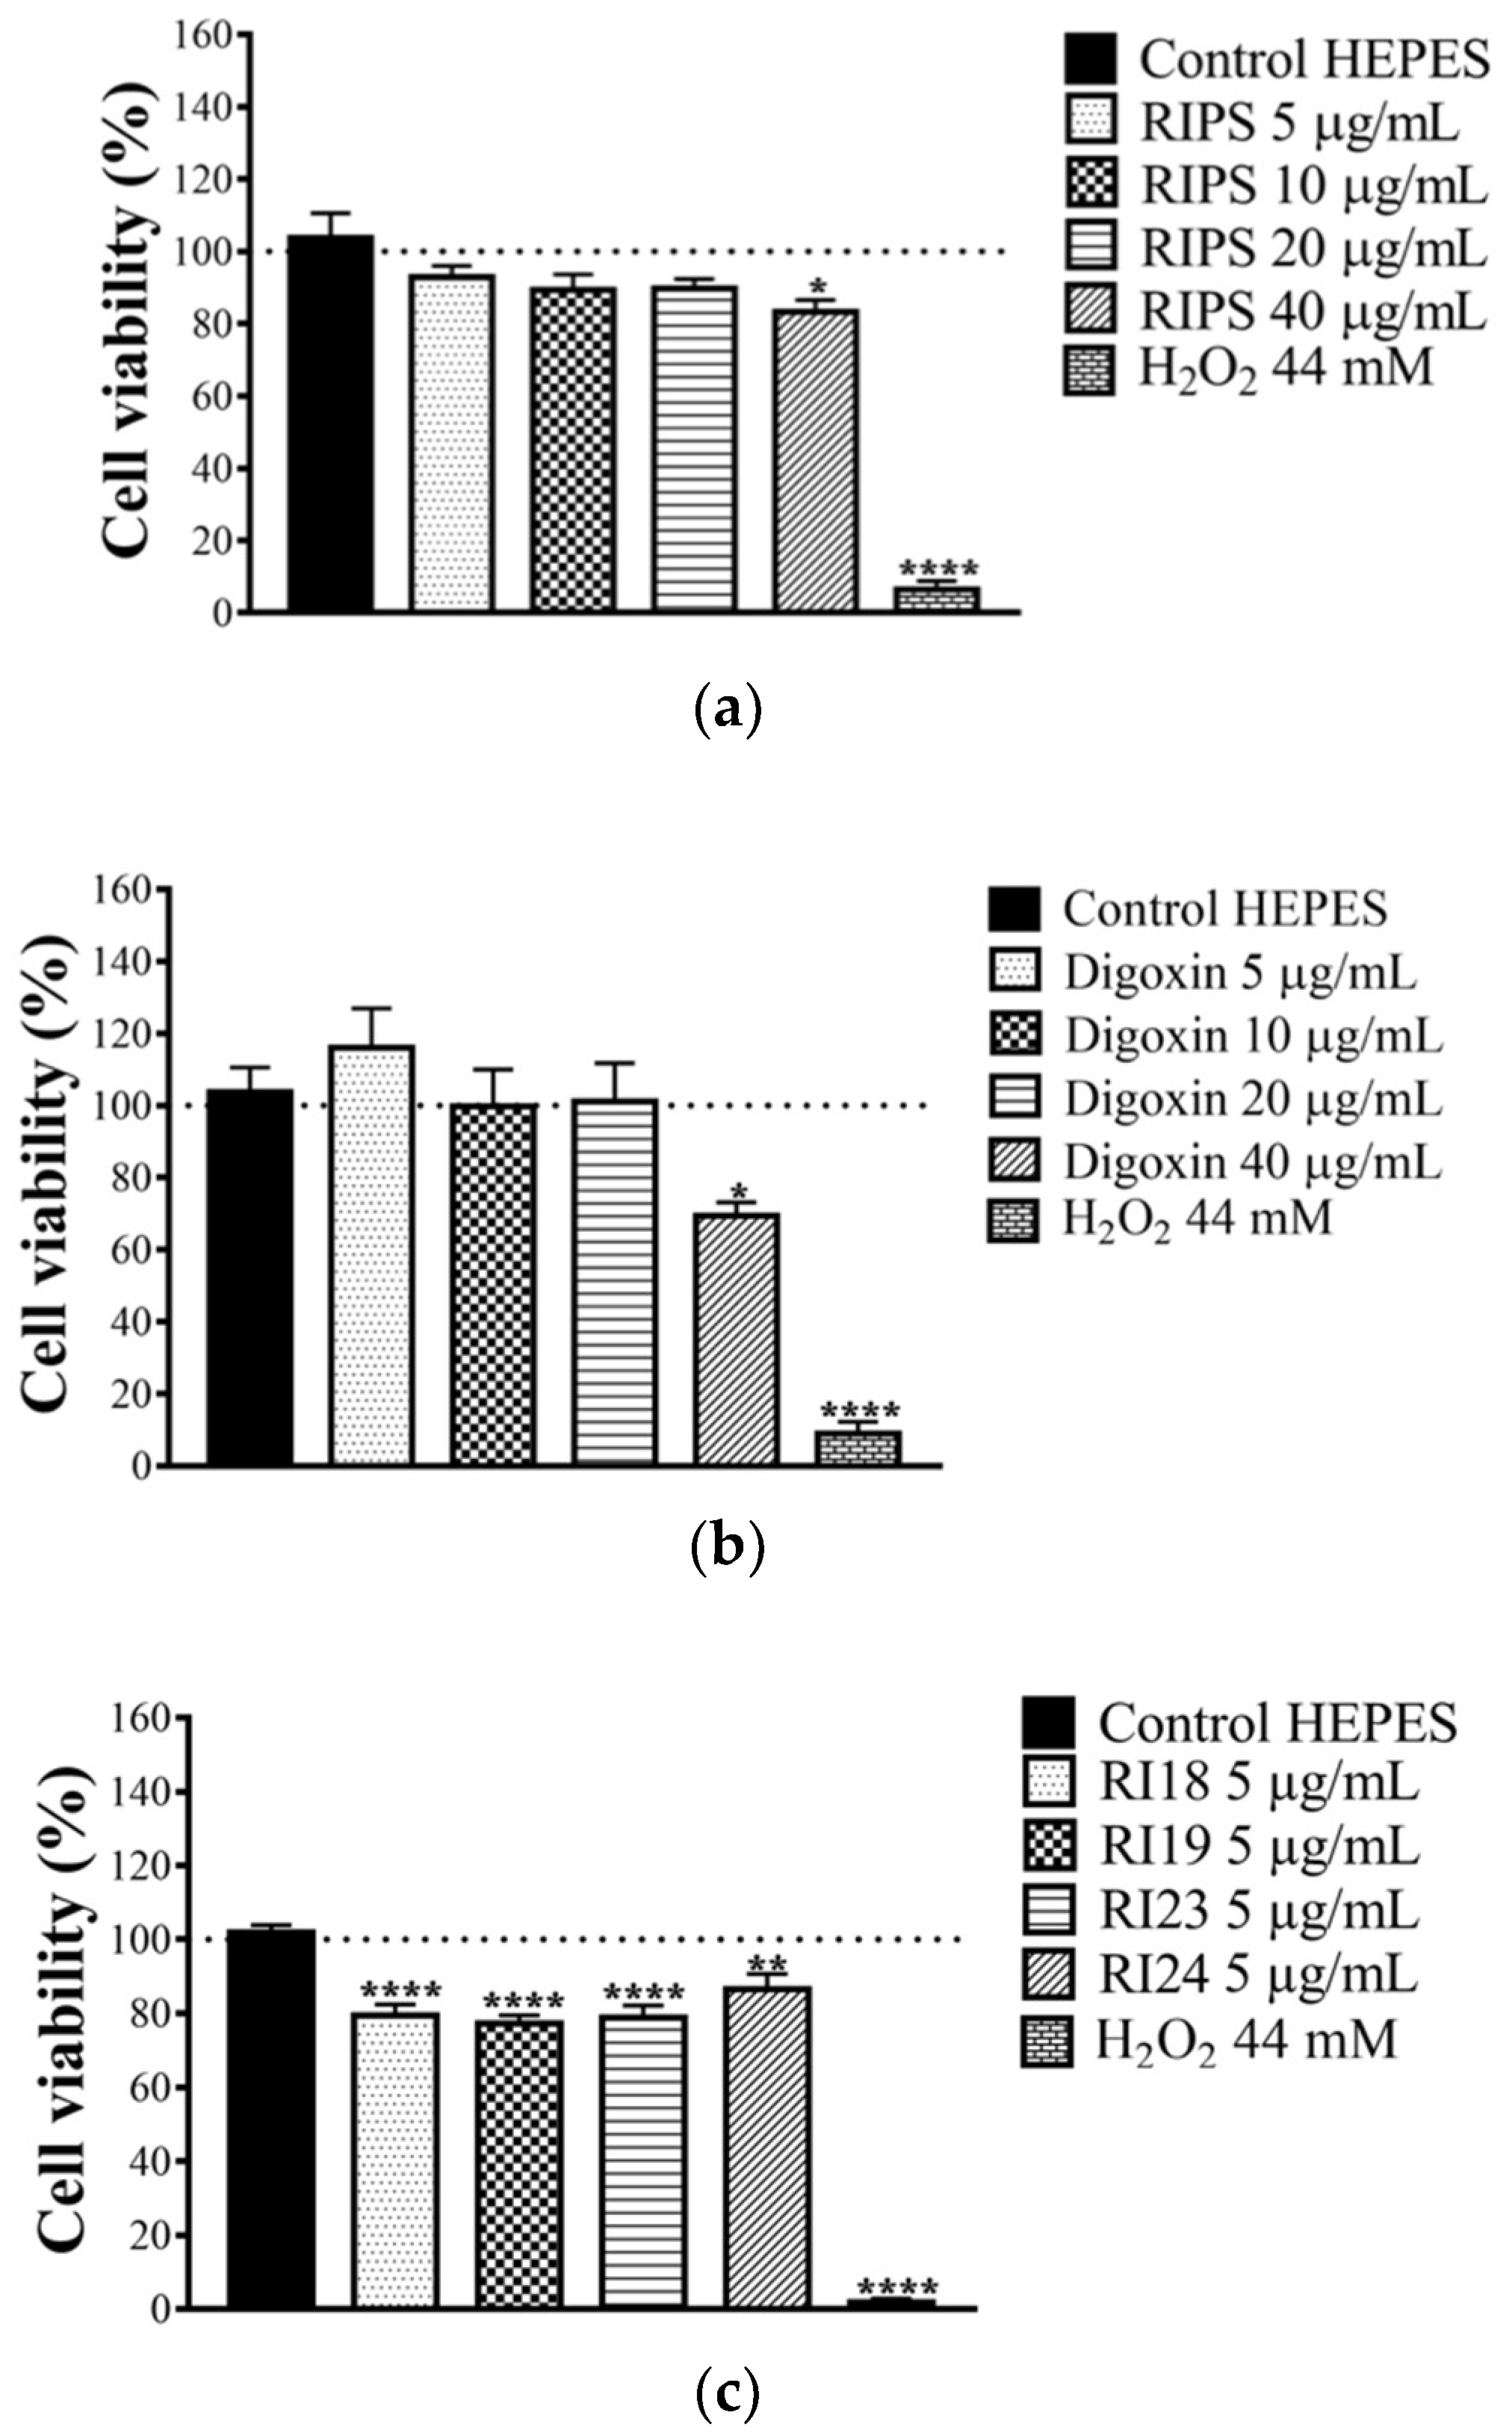 Toxins Free Full Text Chemical And Pharmacological Screening Of Rhinella Icterica Spix 14 Toad Parotoid Secretion In Avian Preparations Html